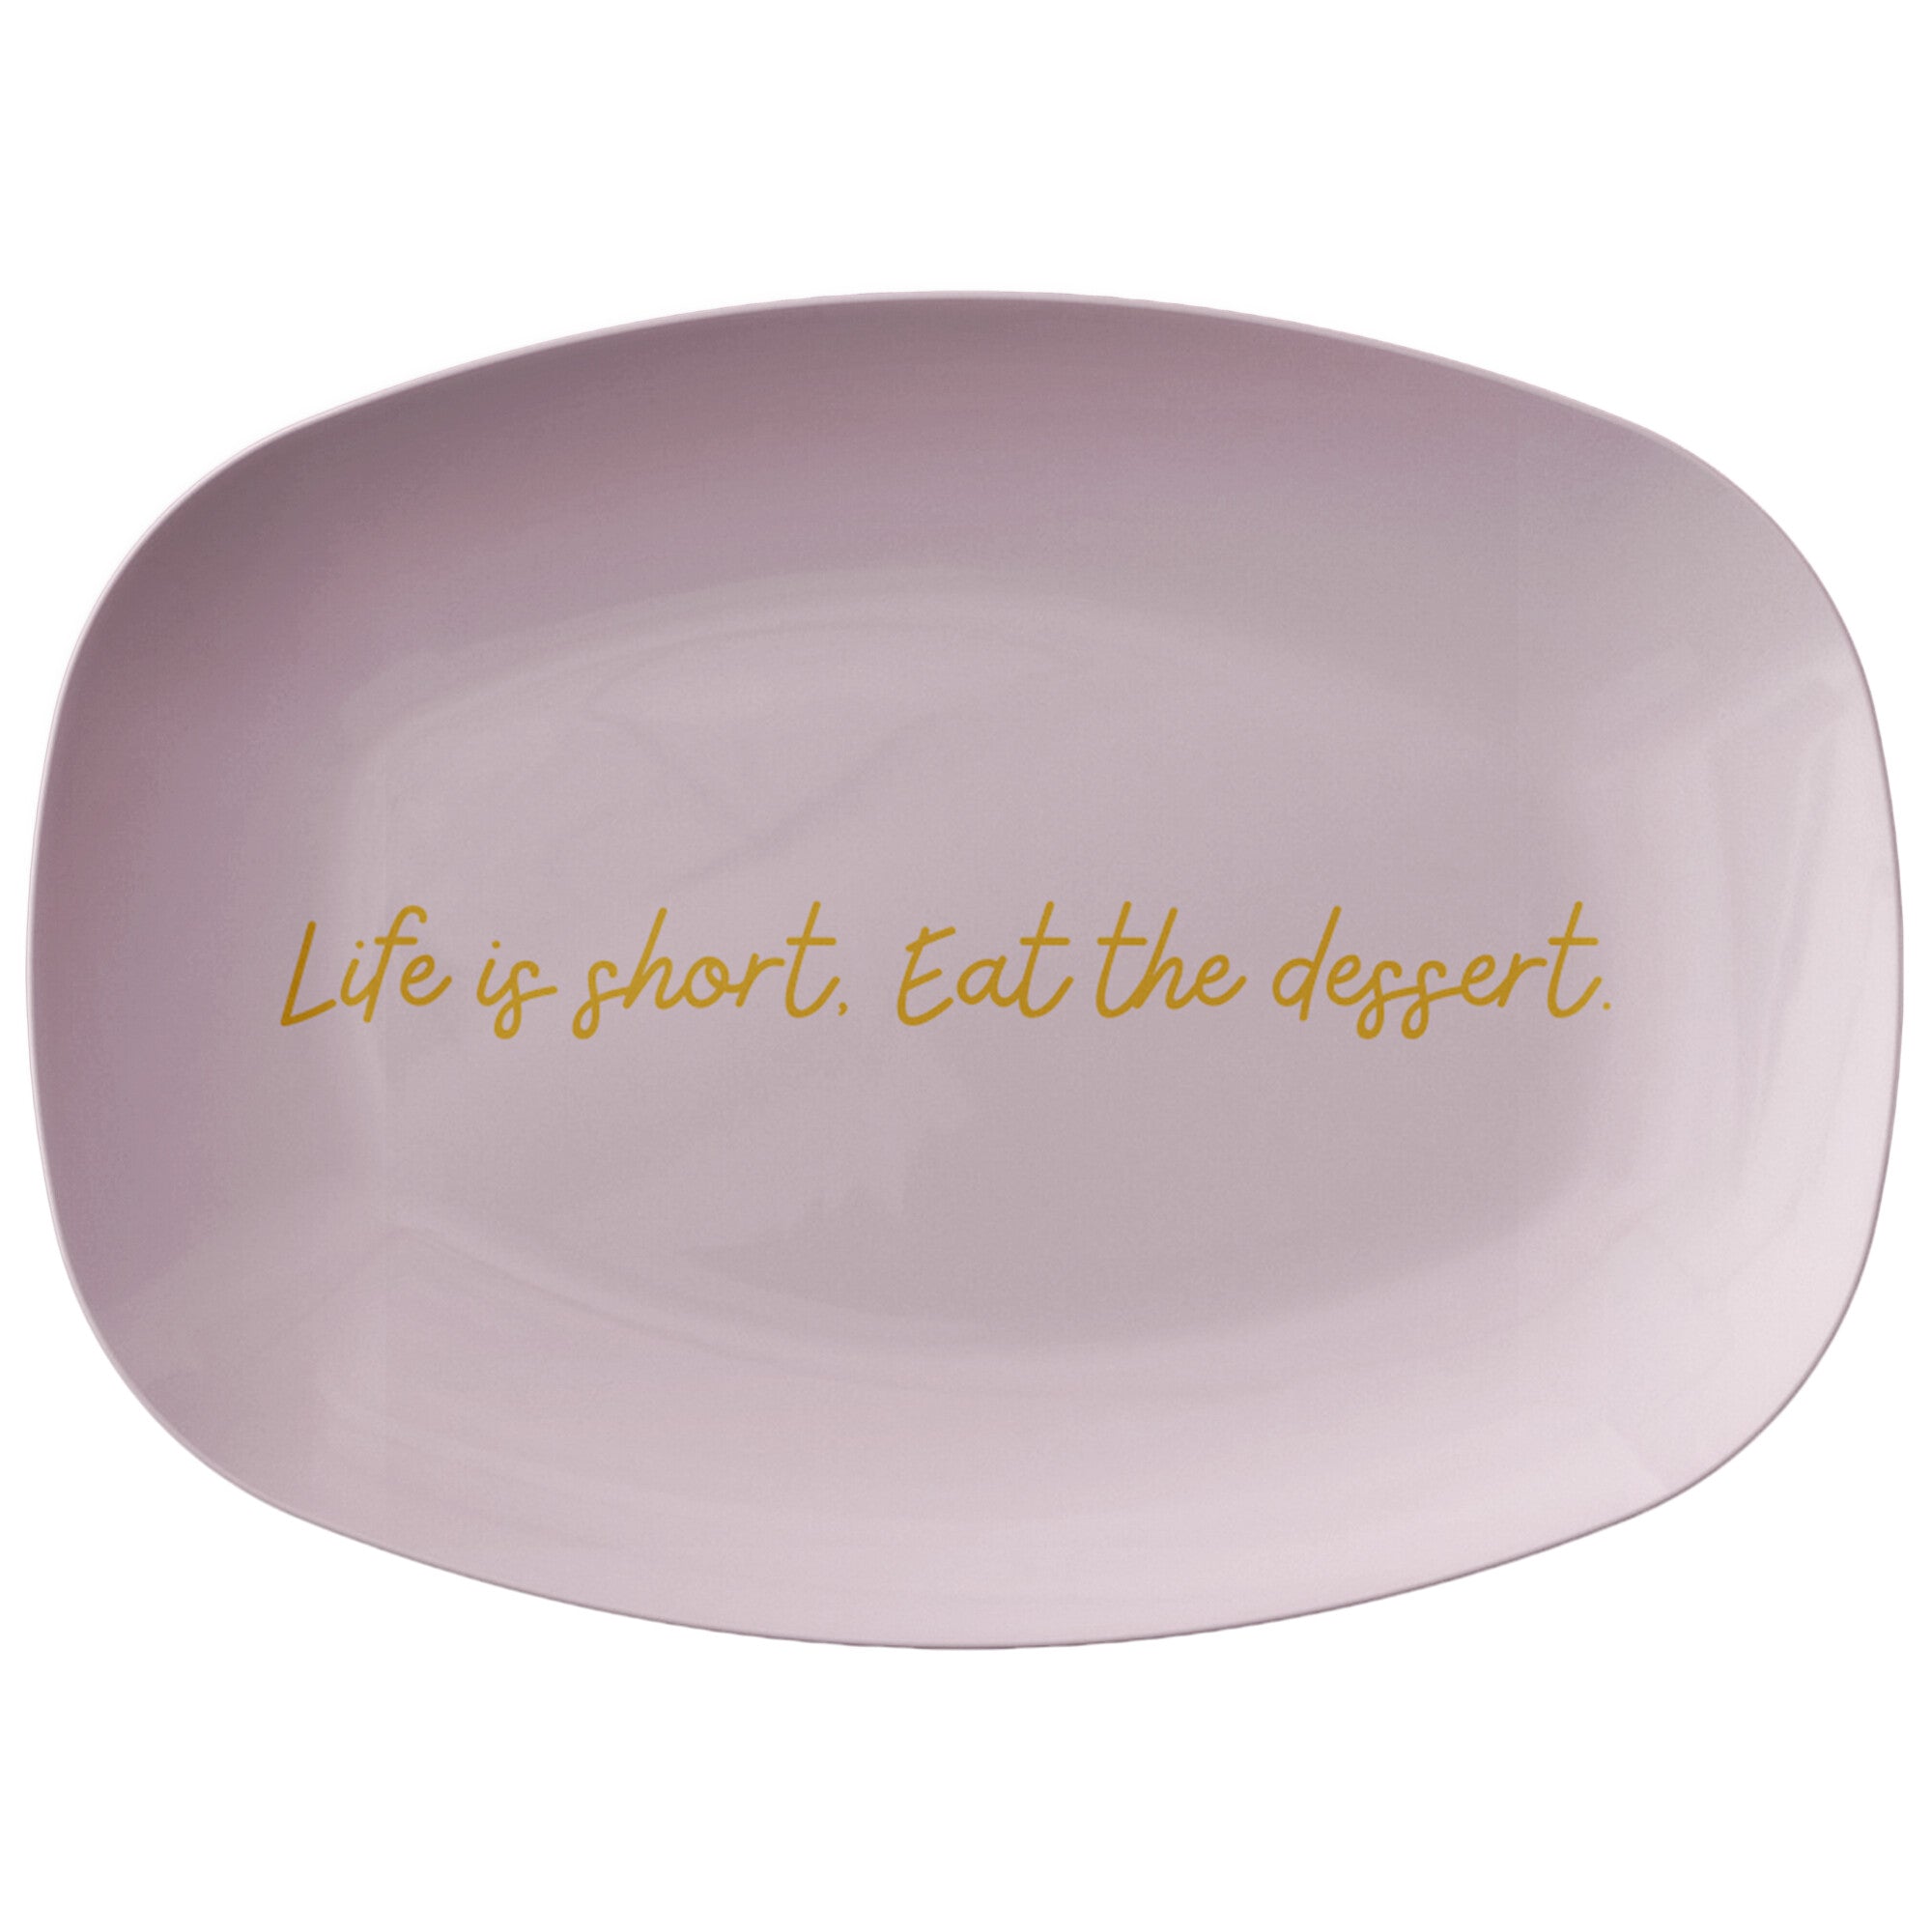 Life is Short. Eat the Dessert. 10x14 Serving Platter - The Kindness Cause